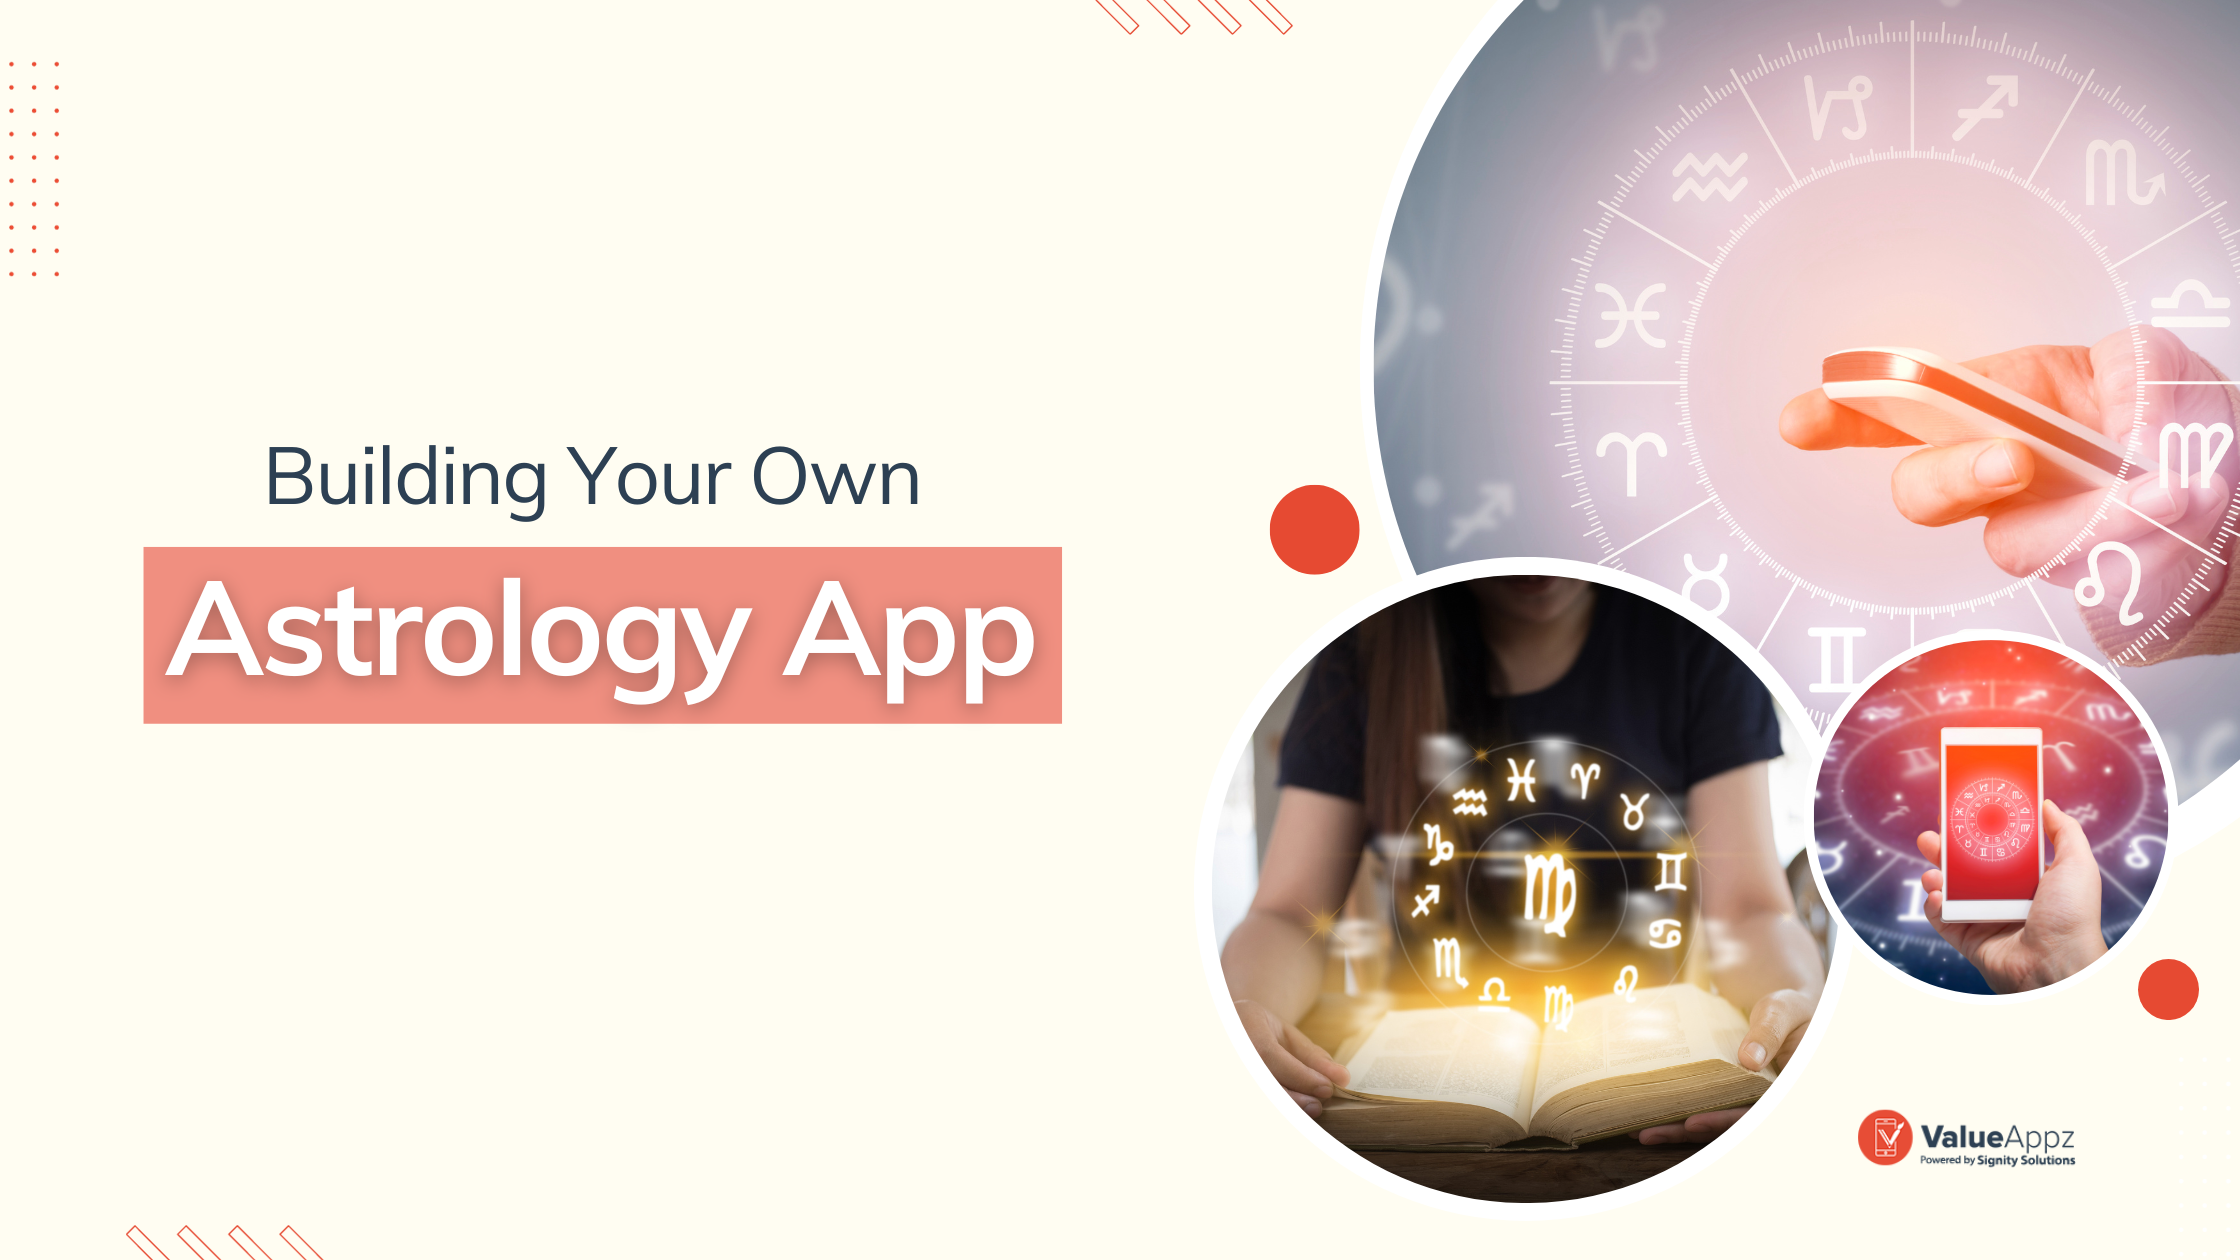 Building Your Own Astrology App